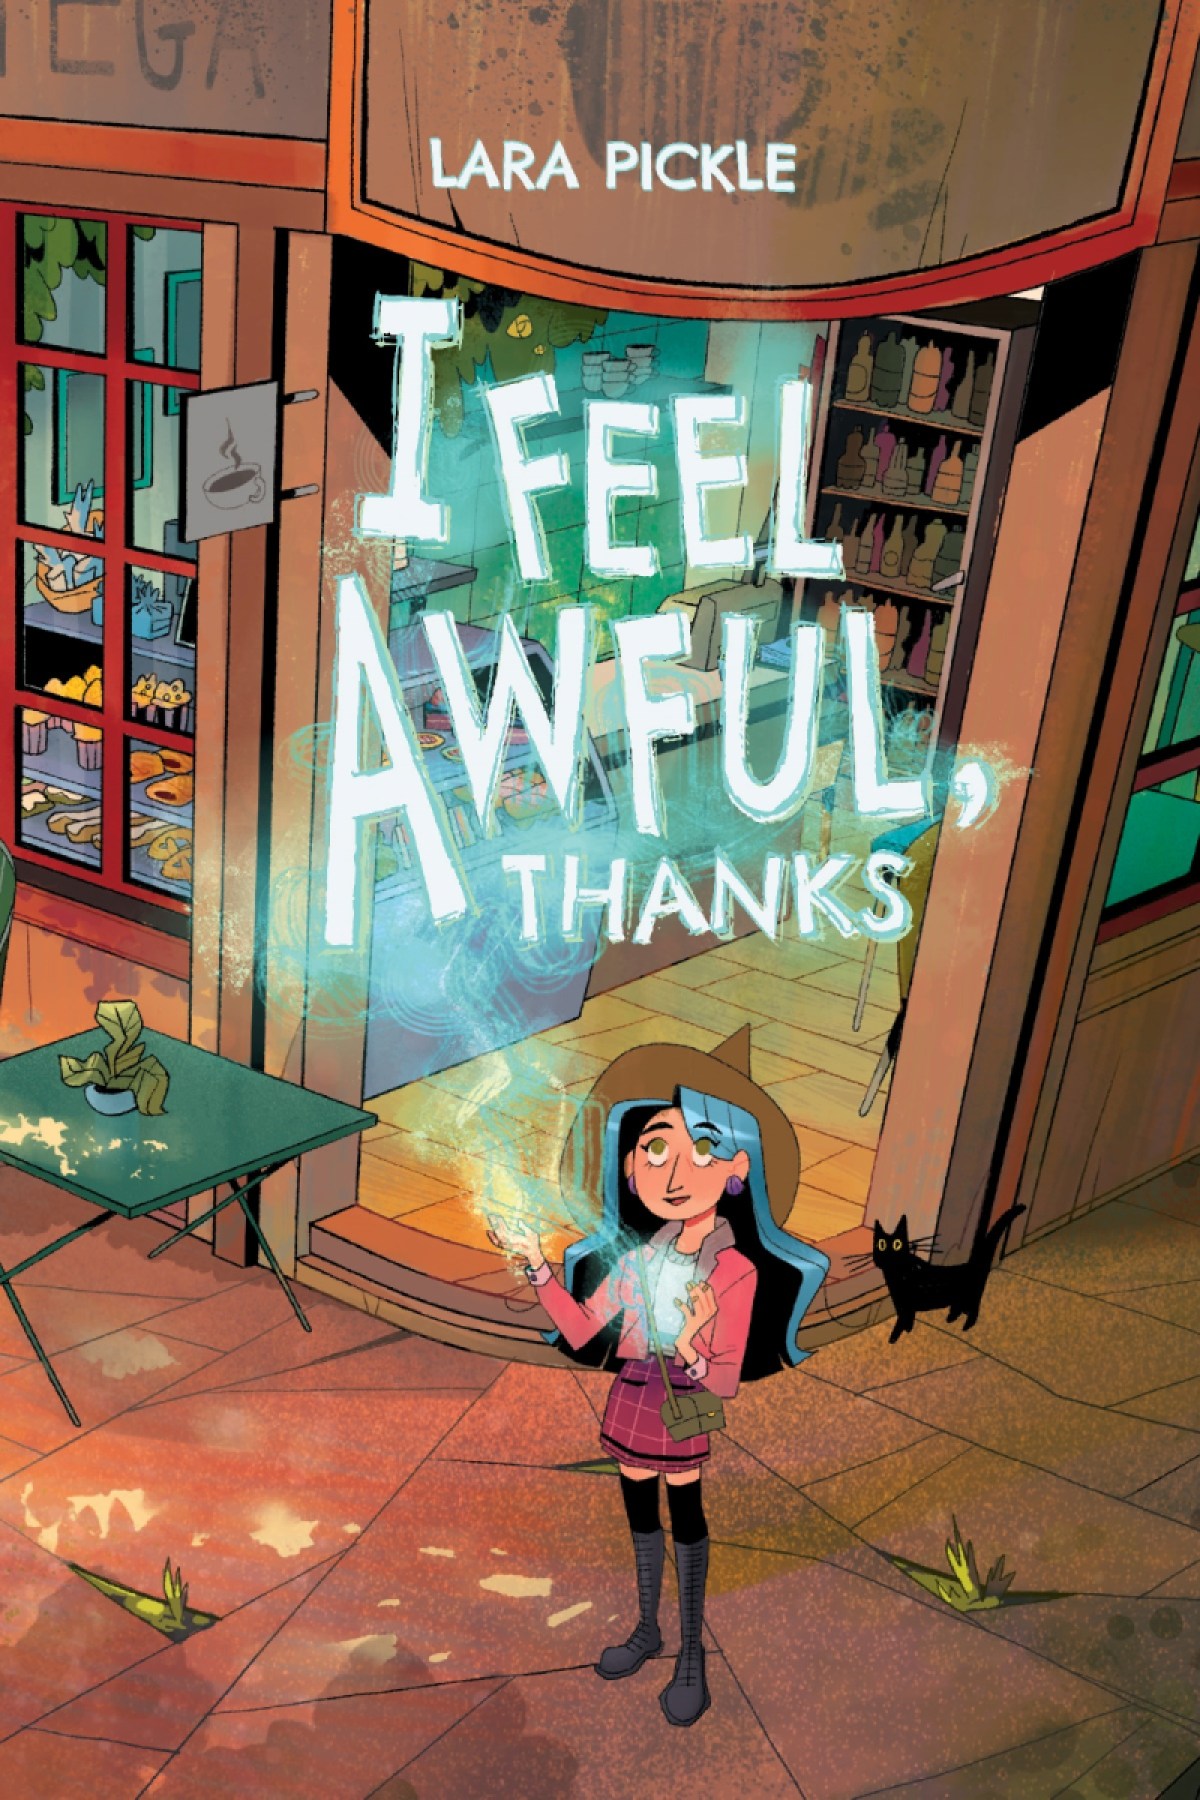 I Feel Awful Thanks cover by Lara Pickle (Oni Press)